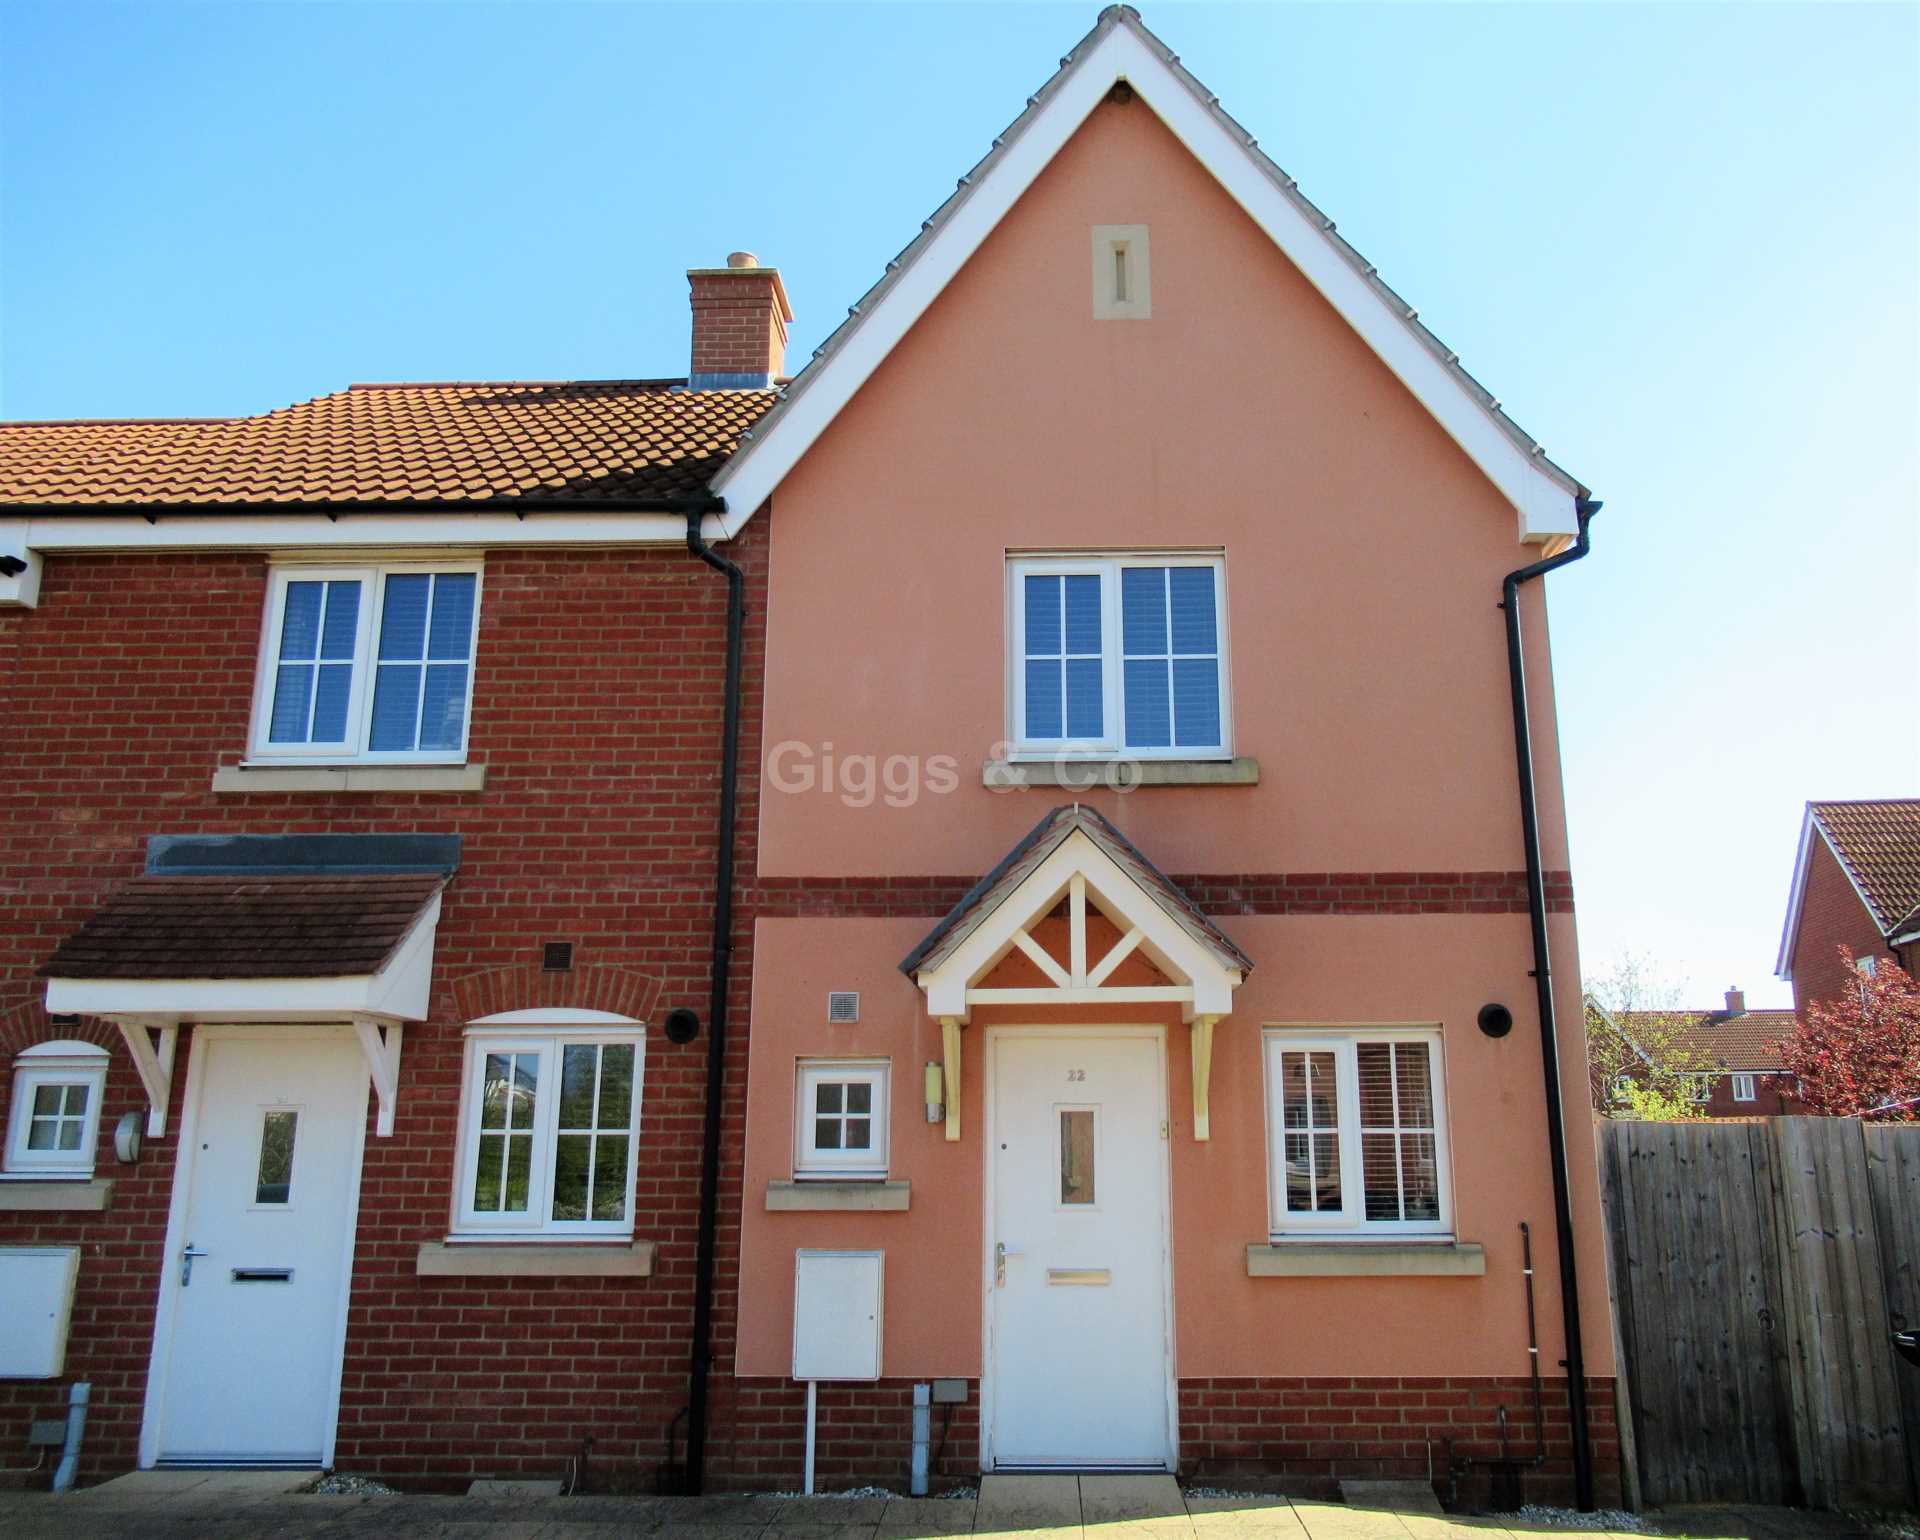 2 bed  to rent in Mallow Close, Eynesbury  - Property Image 1